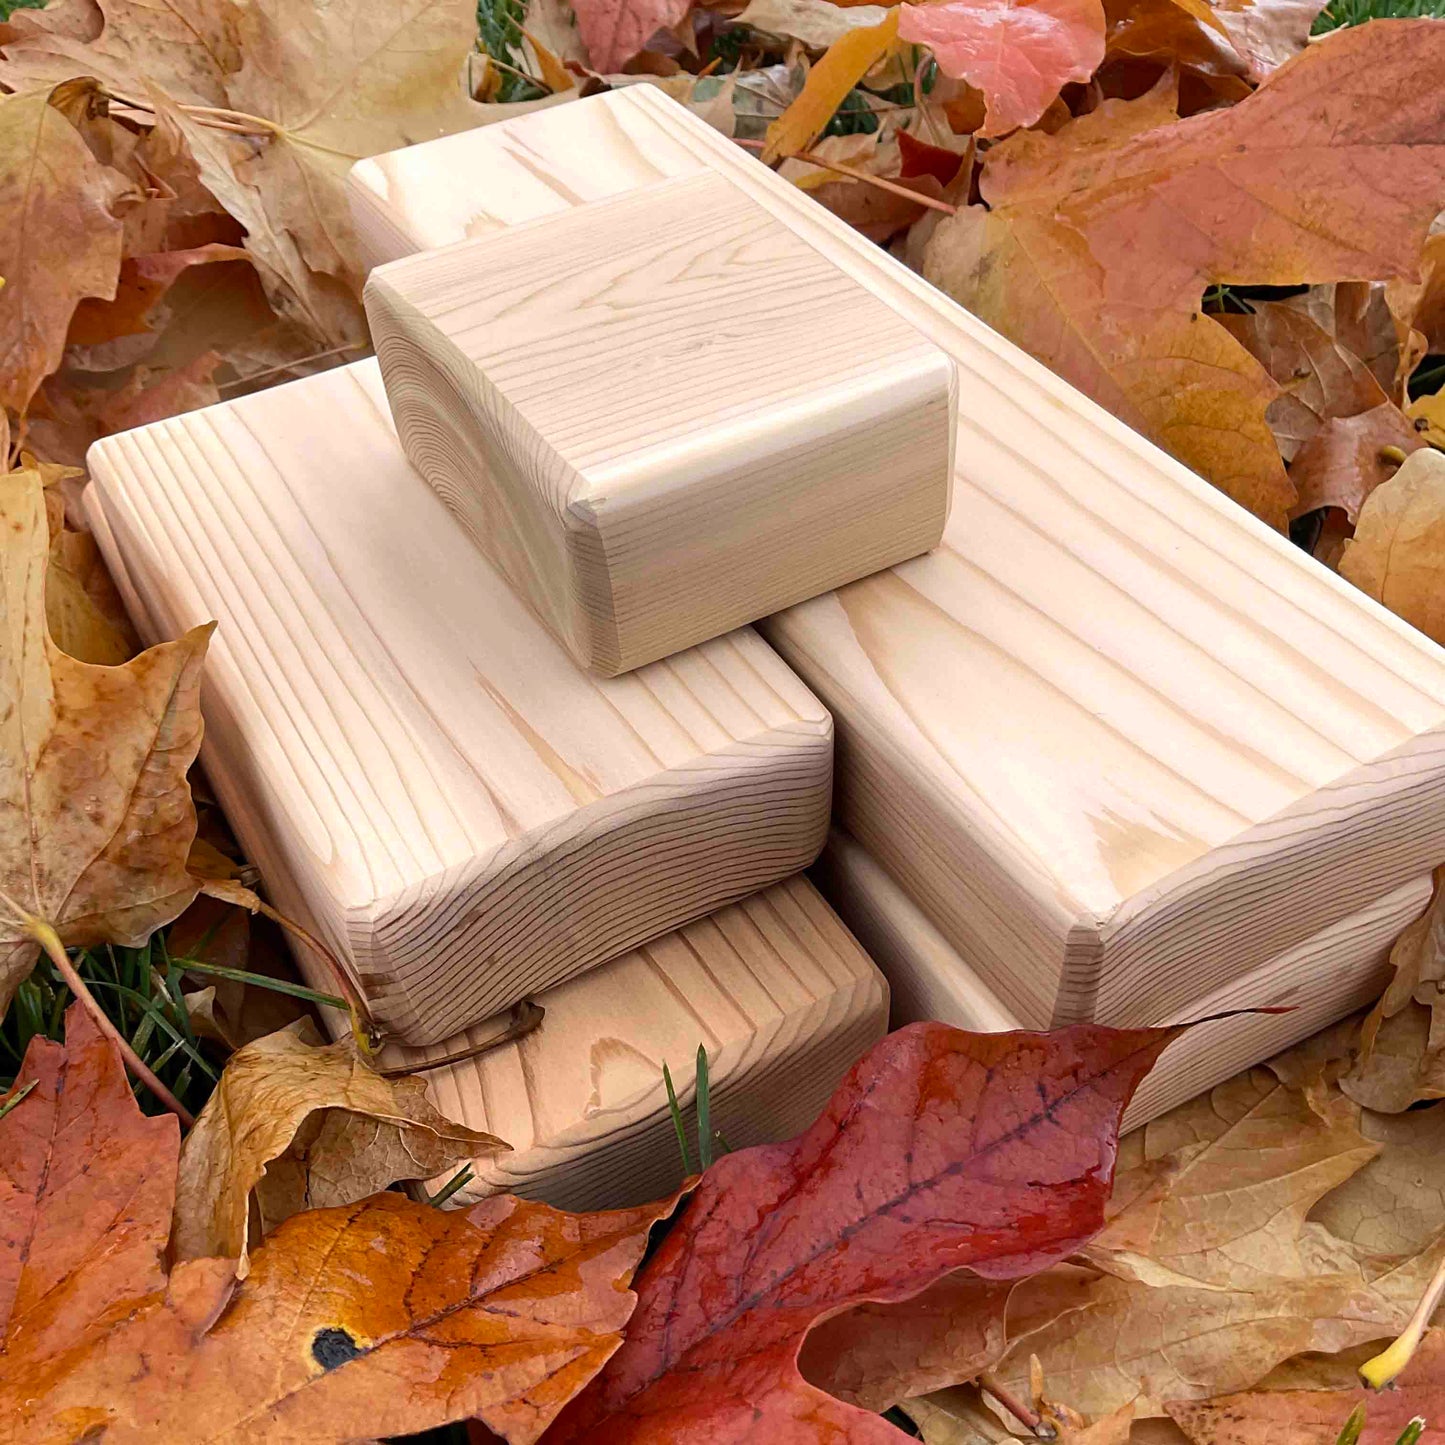 Large Cedar Blocks (16pcs) - Just Playing (Made in Canada)